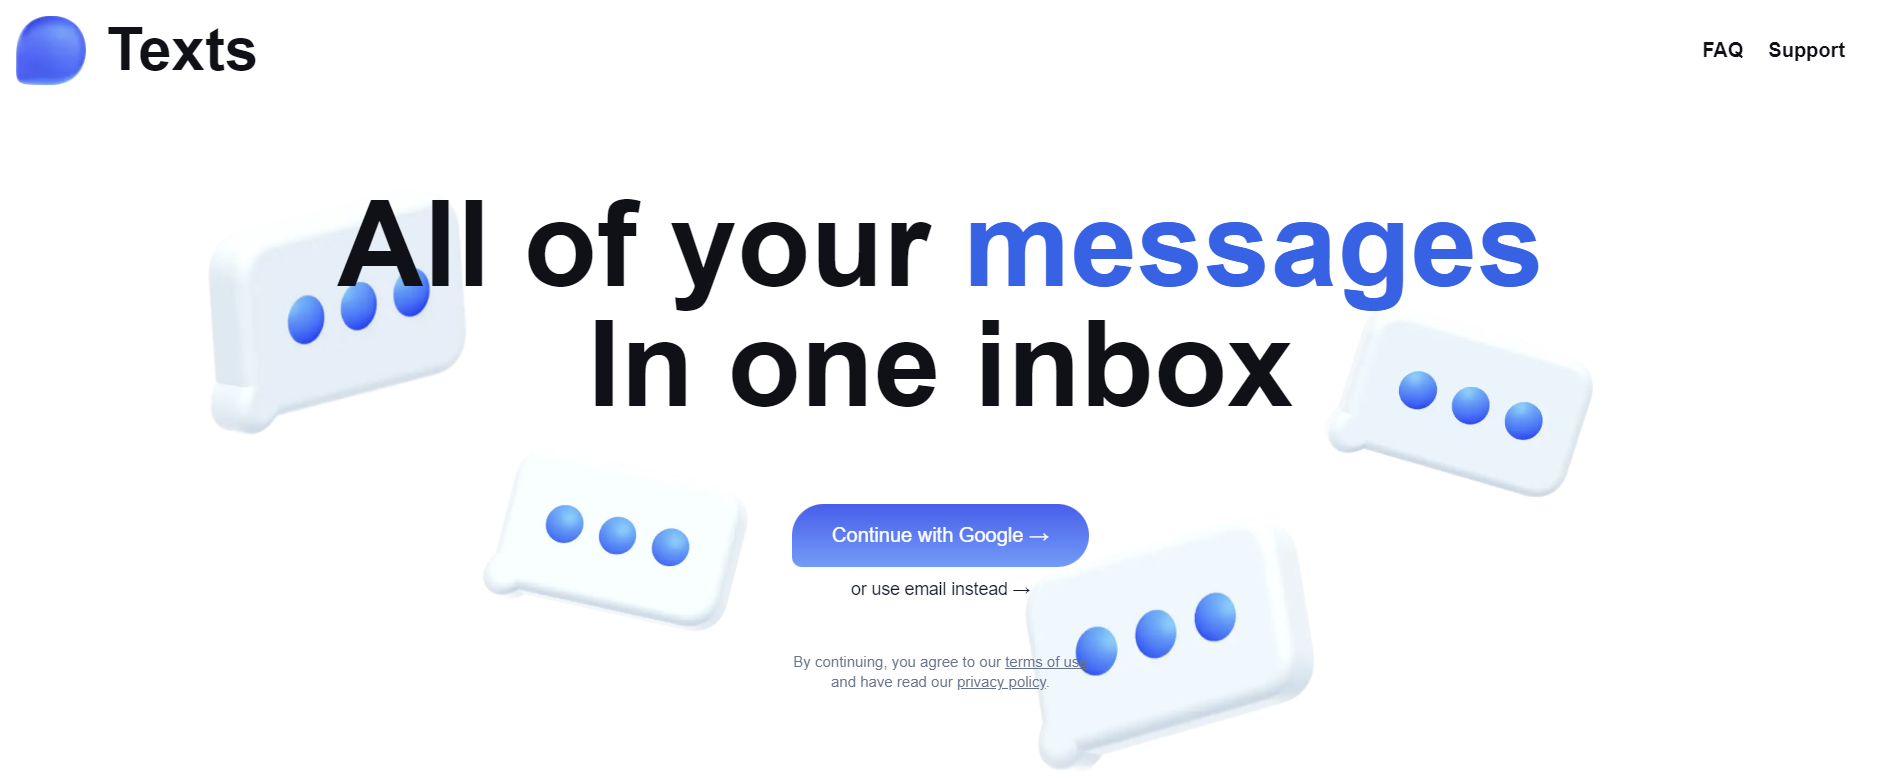 all-in-one messaging app Texts.com.